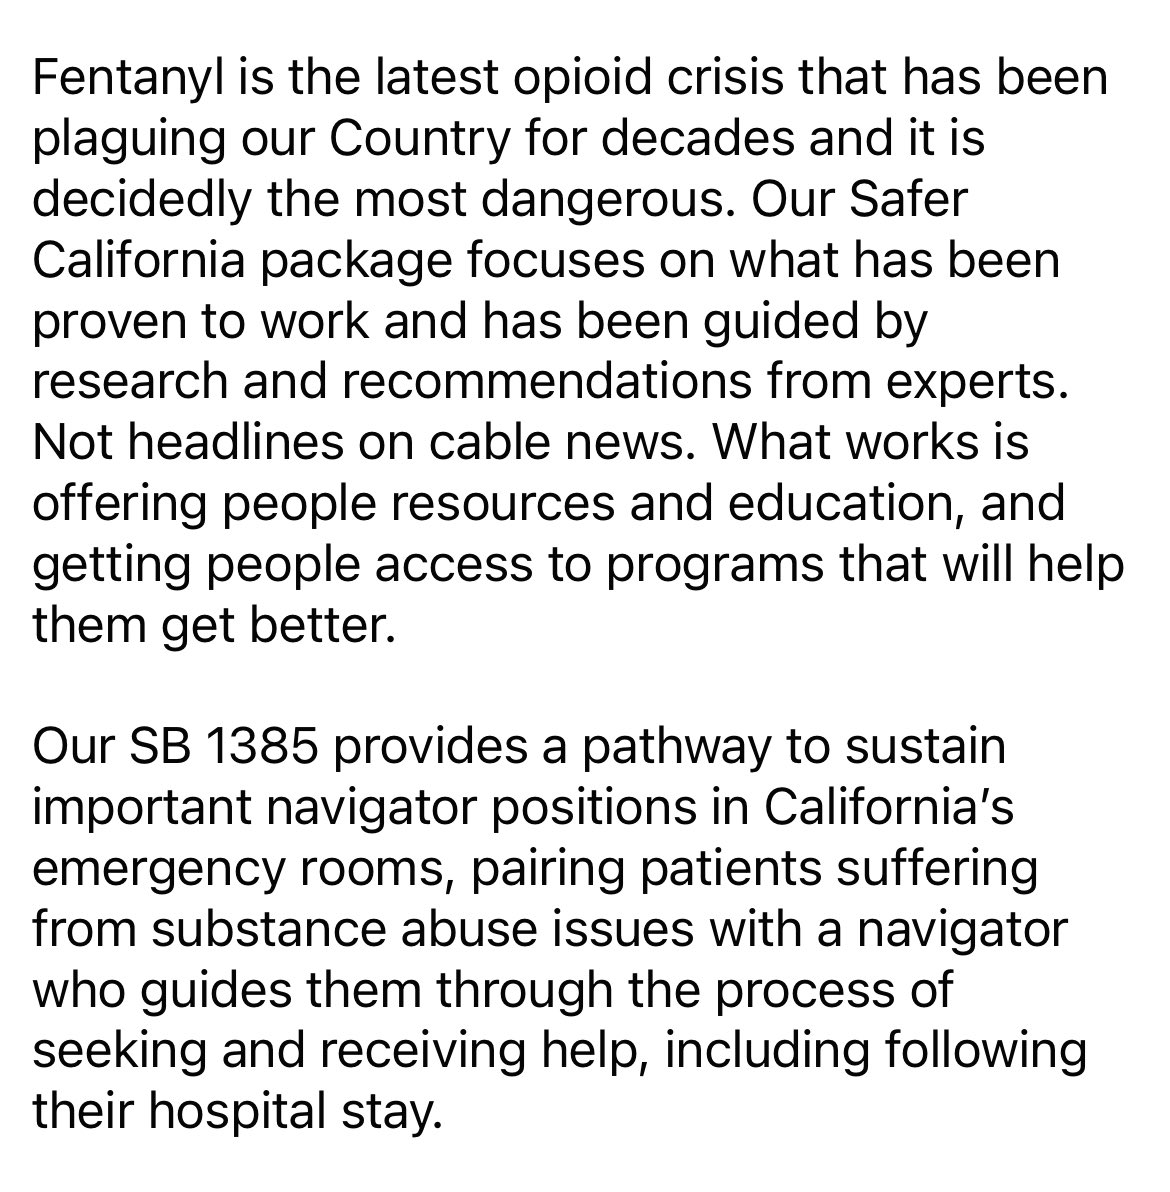 Fentanyl is the latest opioid crisis that has been plaguing our Country for decades and it is decidedly the most dangerous. Our Safer California package focuses on what has been proven to work and has been guided by research and recommendations from experts. @CASenateDems